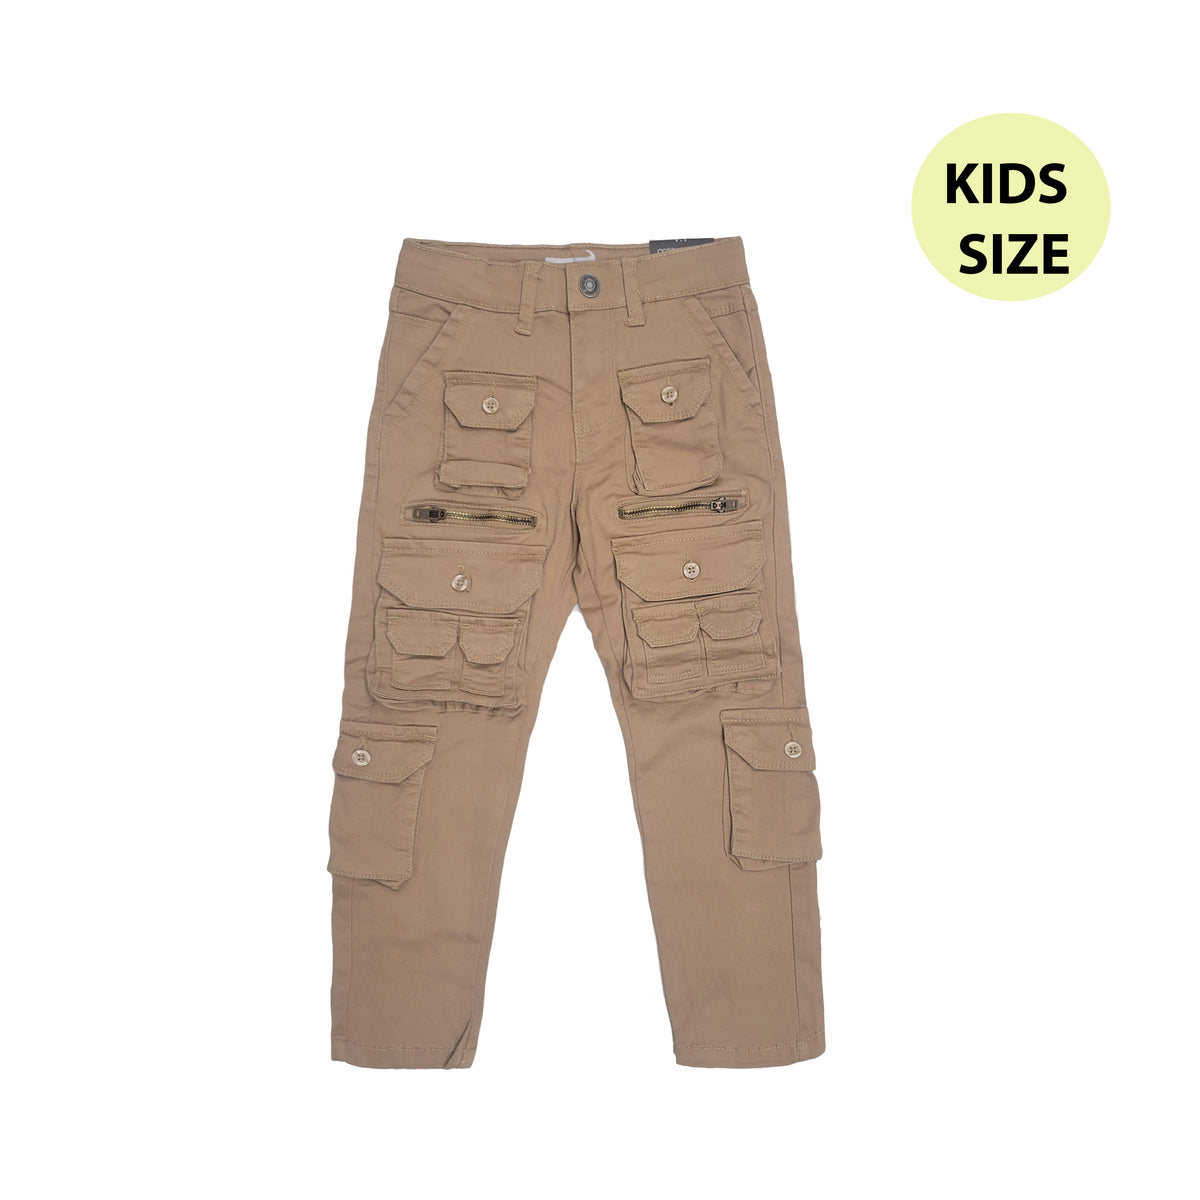 Kids Big Kids' French Terry Cargo Pants For Boys, C Patch, 25